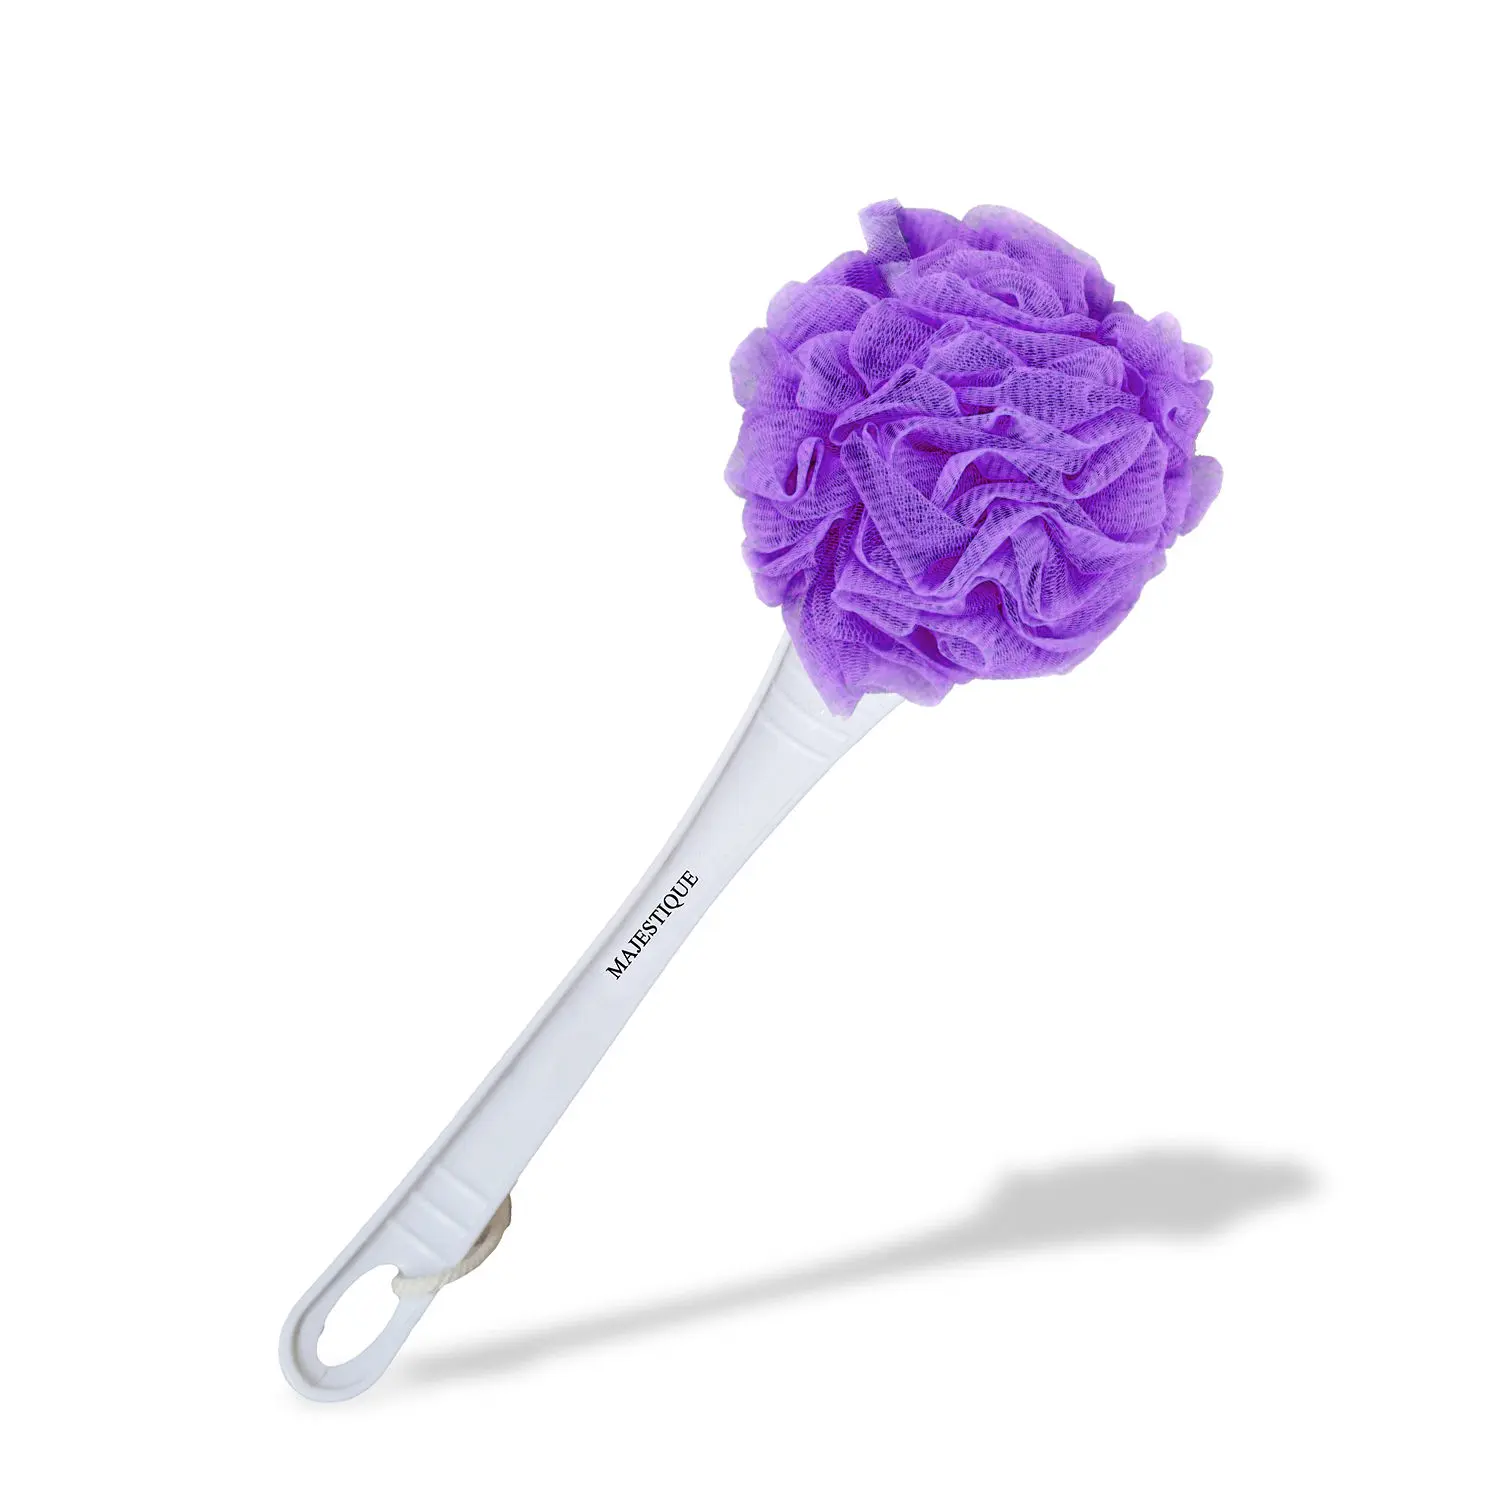 Majestique Round Long Handle Loofah for Back Scrubber - Soft Nylon Mesh Sponge - Color May Vary